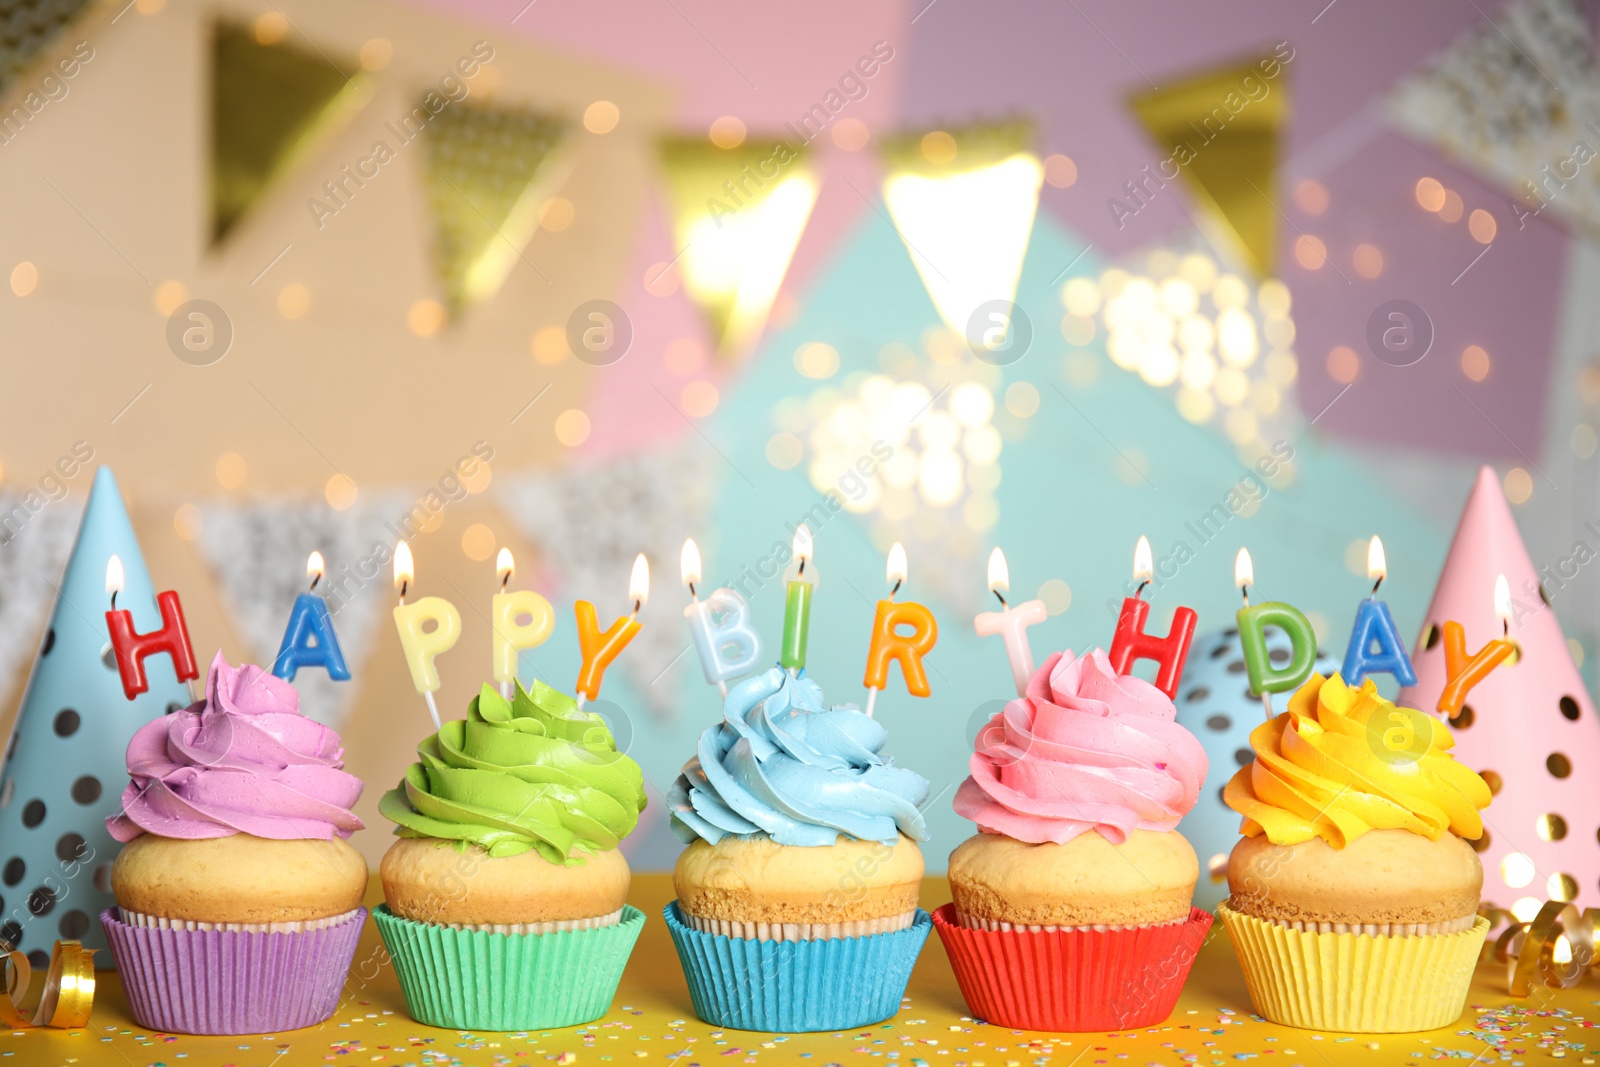 Photo of Birthday cupcakes with burning candles on yellow table